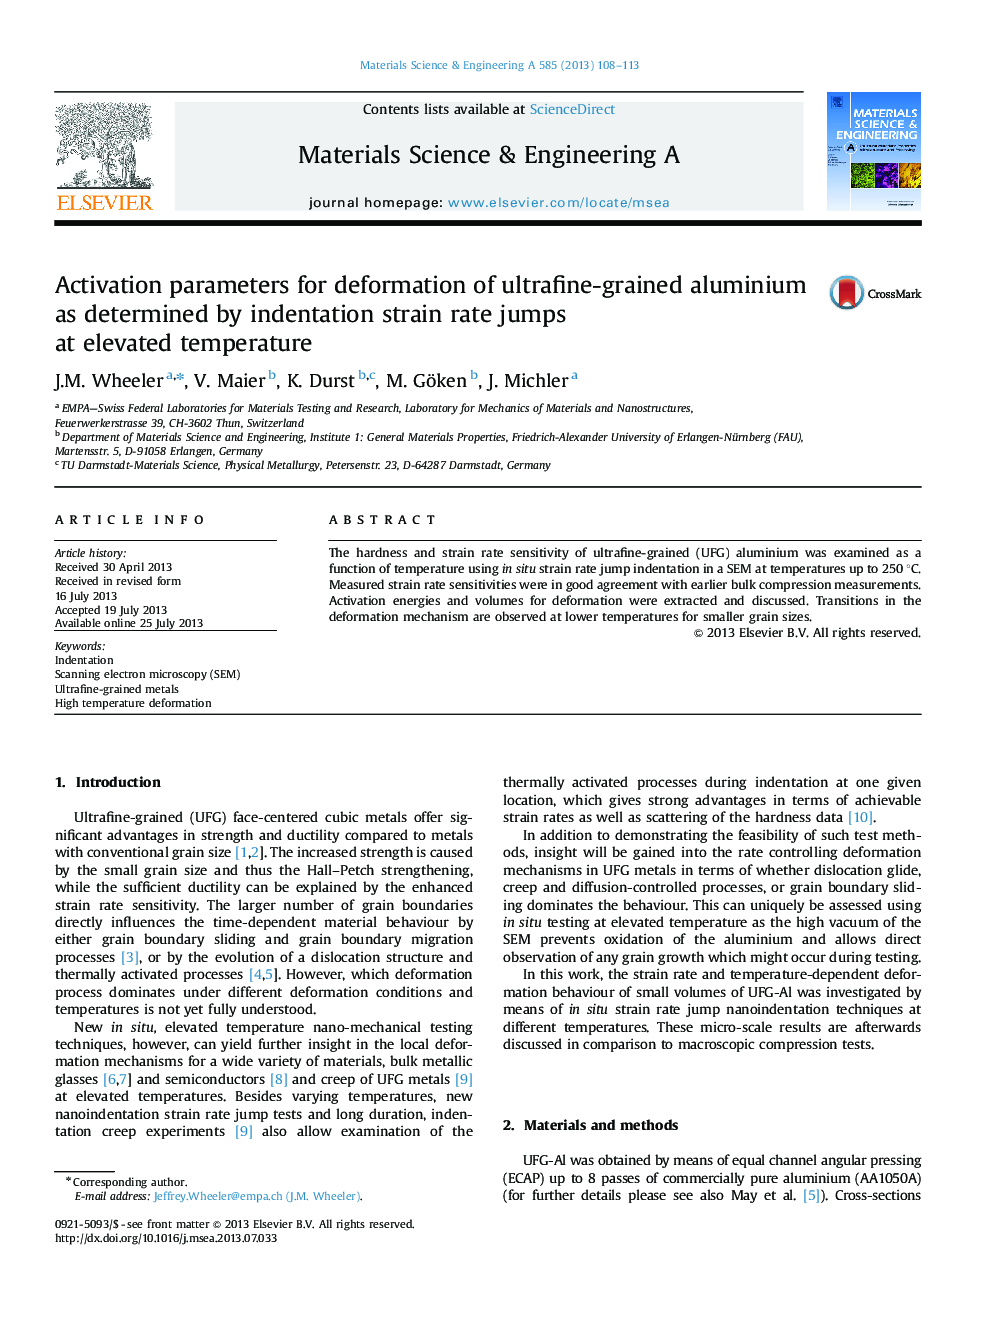 Activation parameters for deformation of ultrafine-grained aluminium as determined by indentation strain rate jumps at elevated temperature